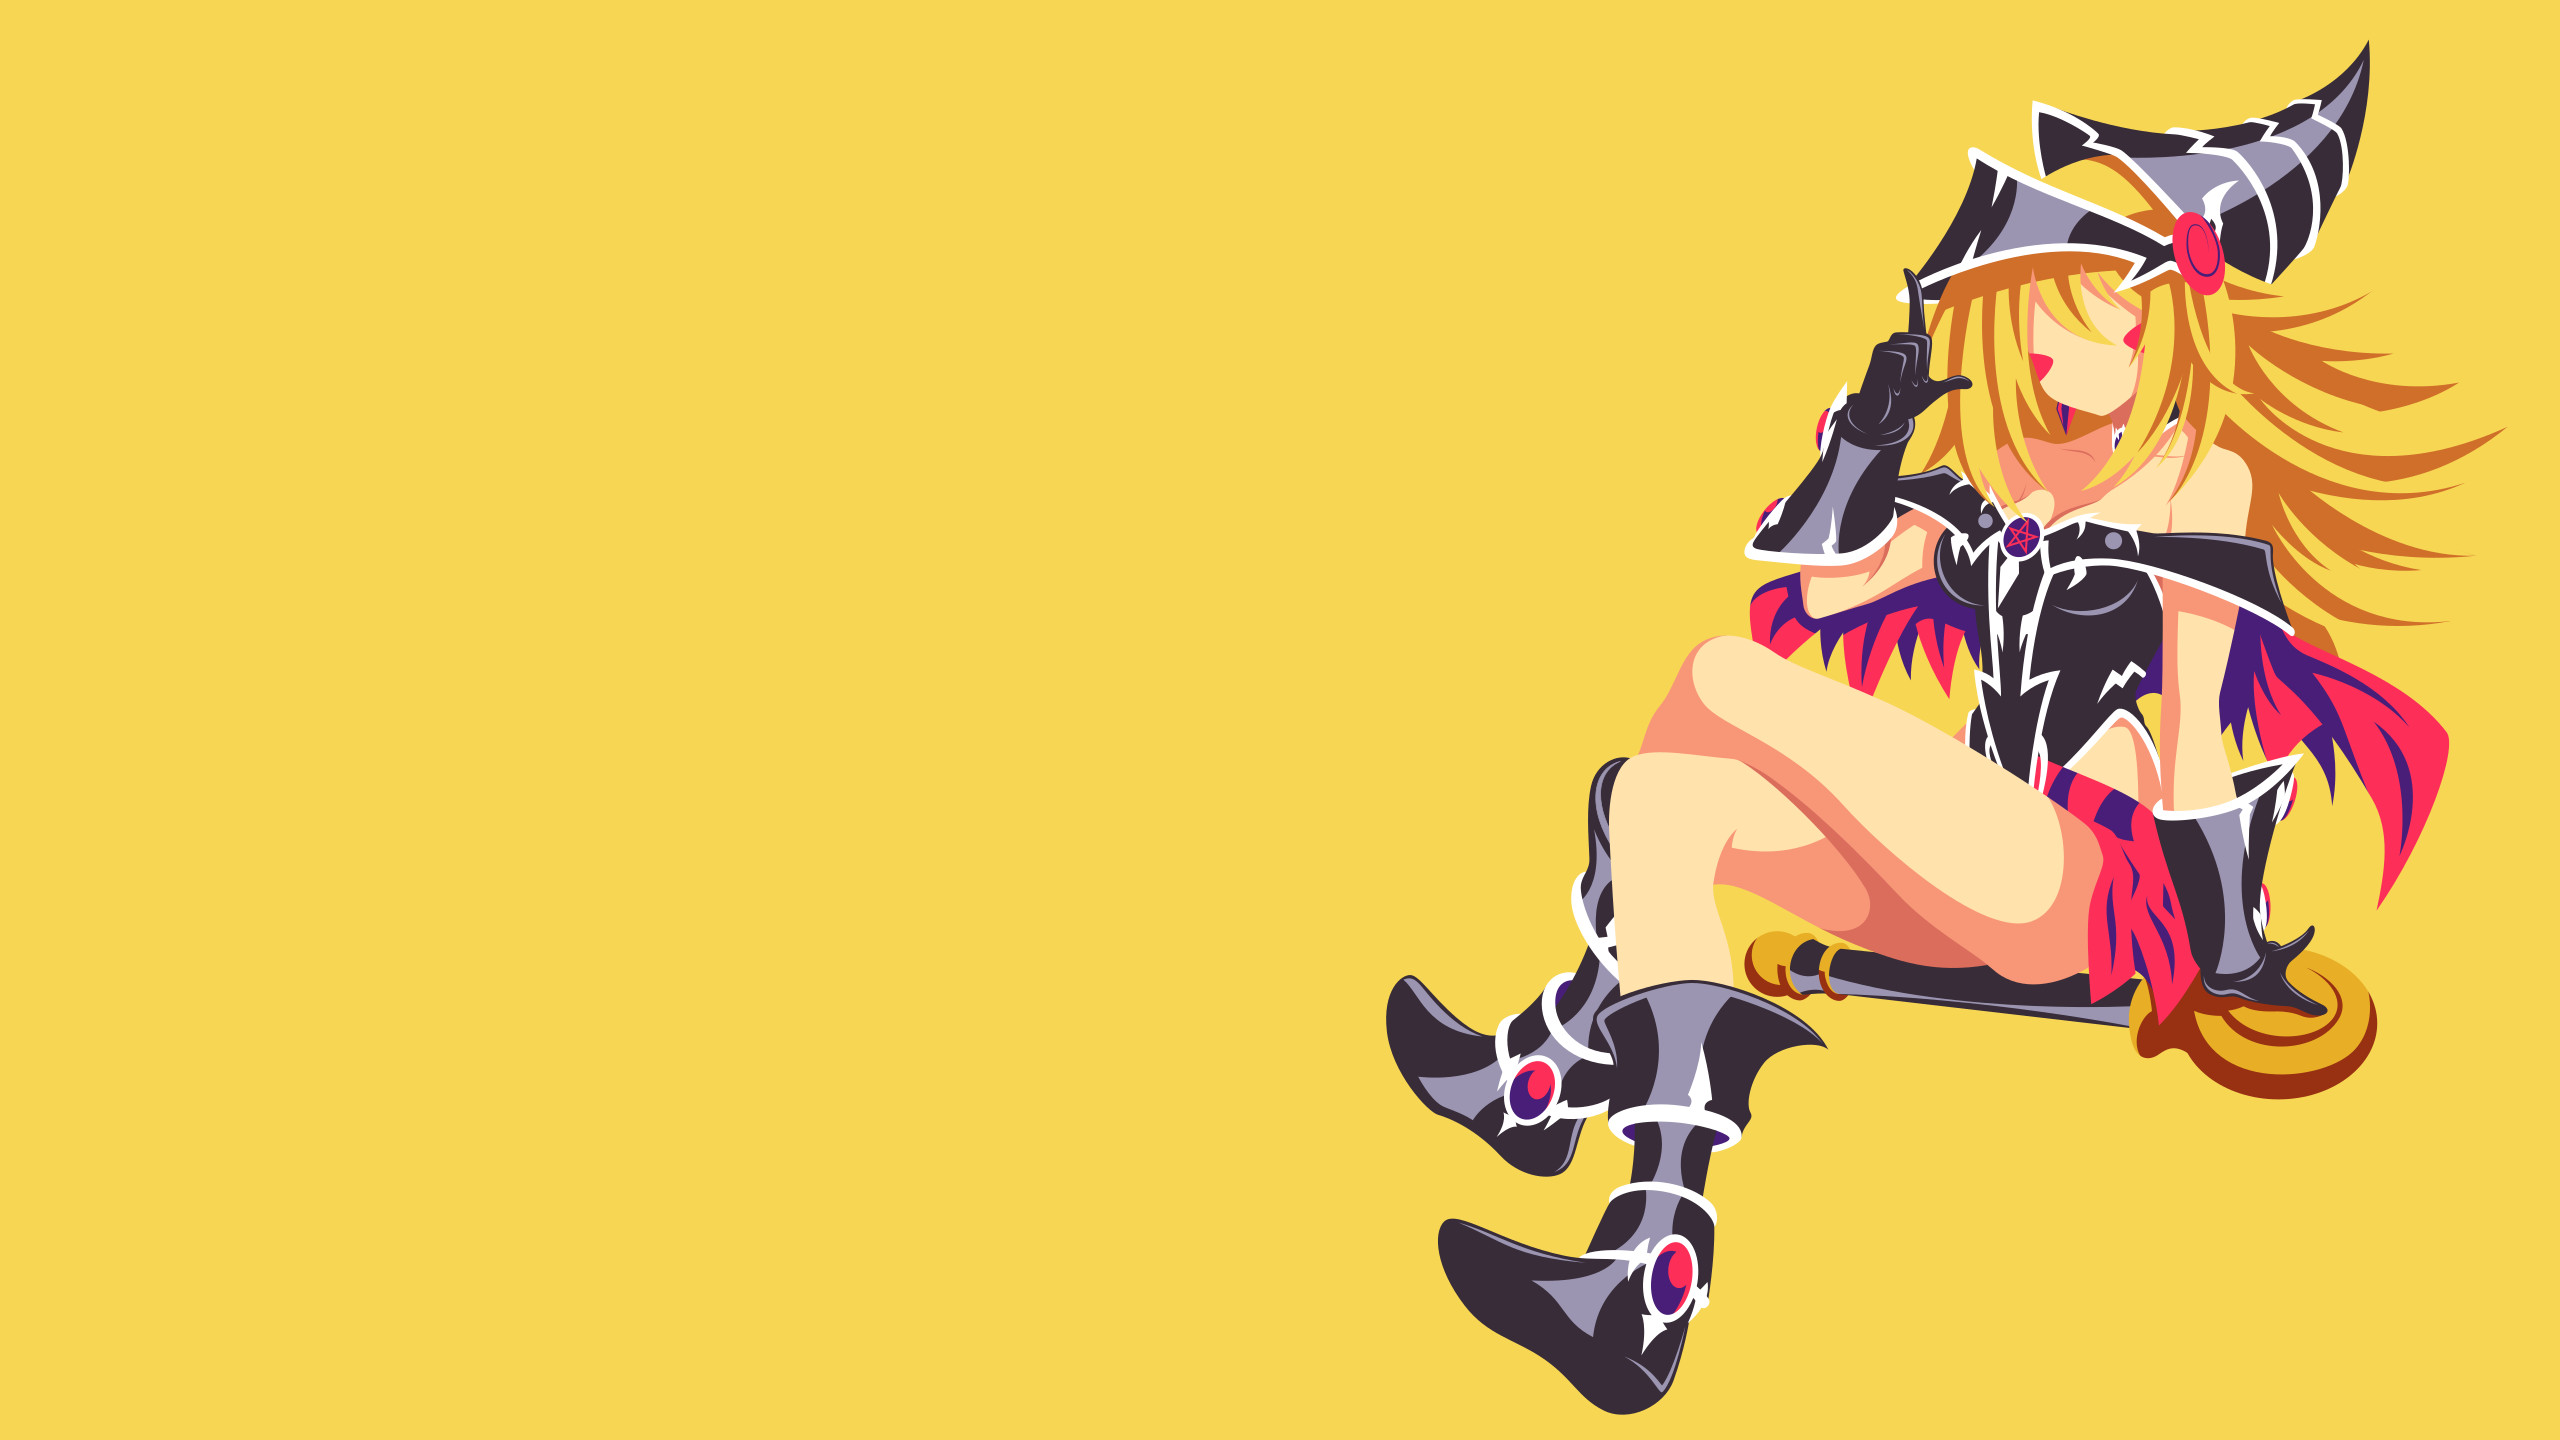 2560x1440 ... YuGiOh - Dark Magician Girl minimalism wallpaper by Carionto